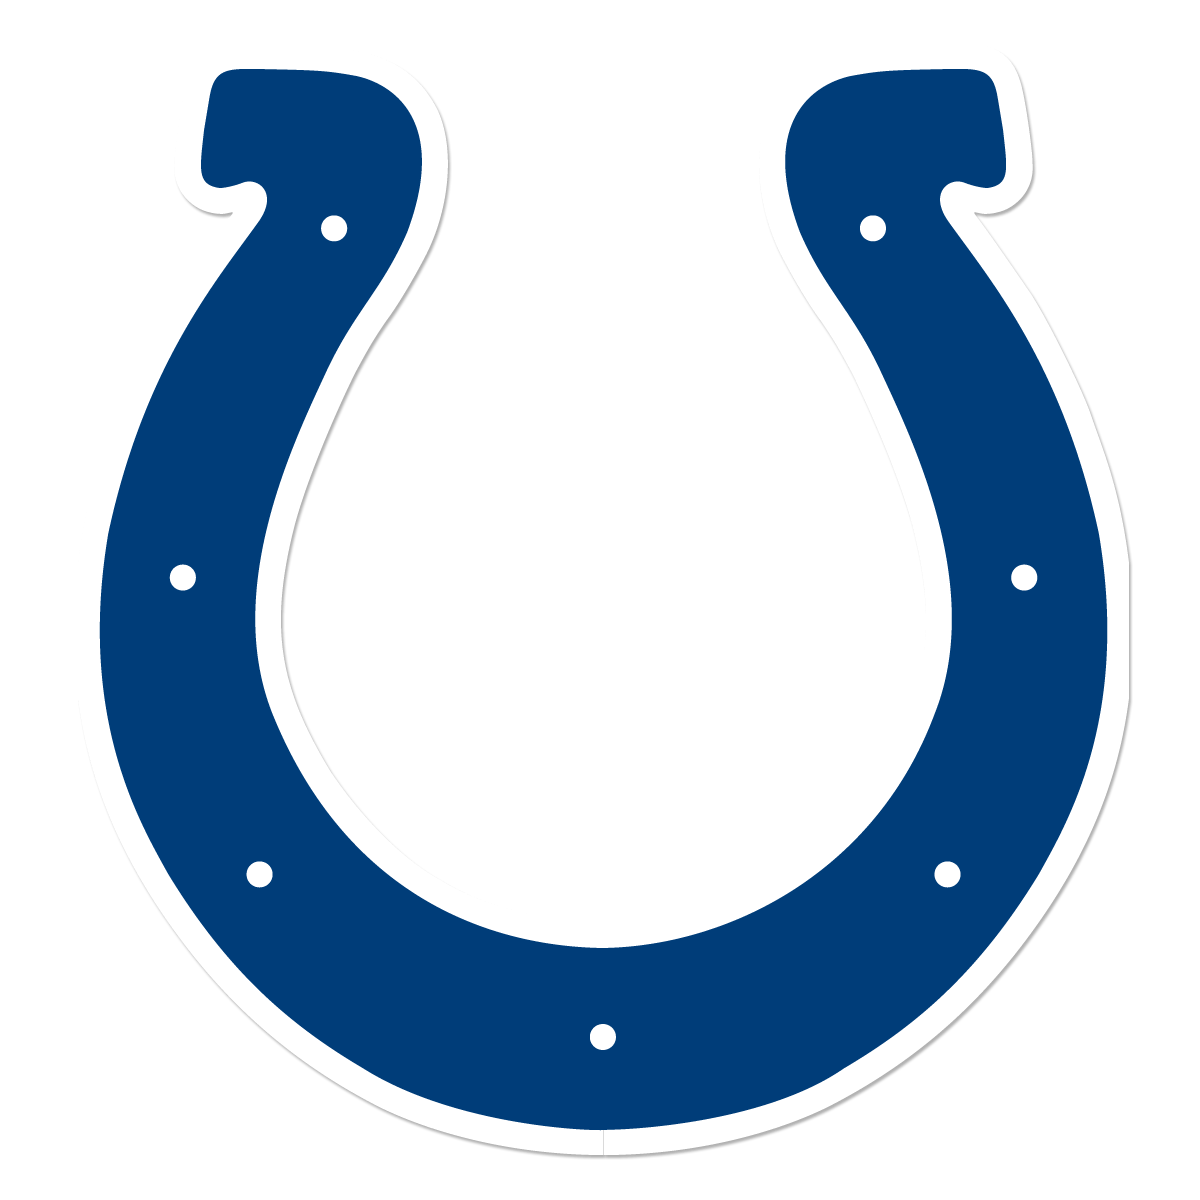 Horseshoe -Shaped Logo - Indianapolis Colts Logo, Colts Symbol Meaning, History and Evolution